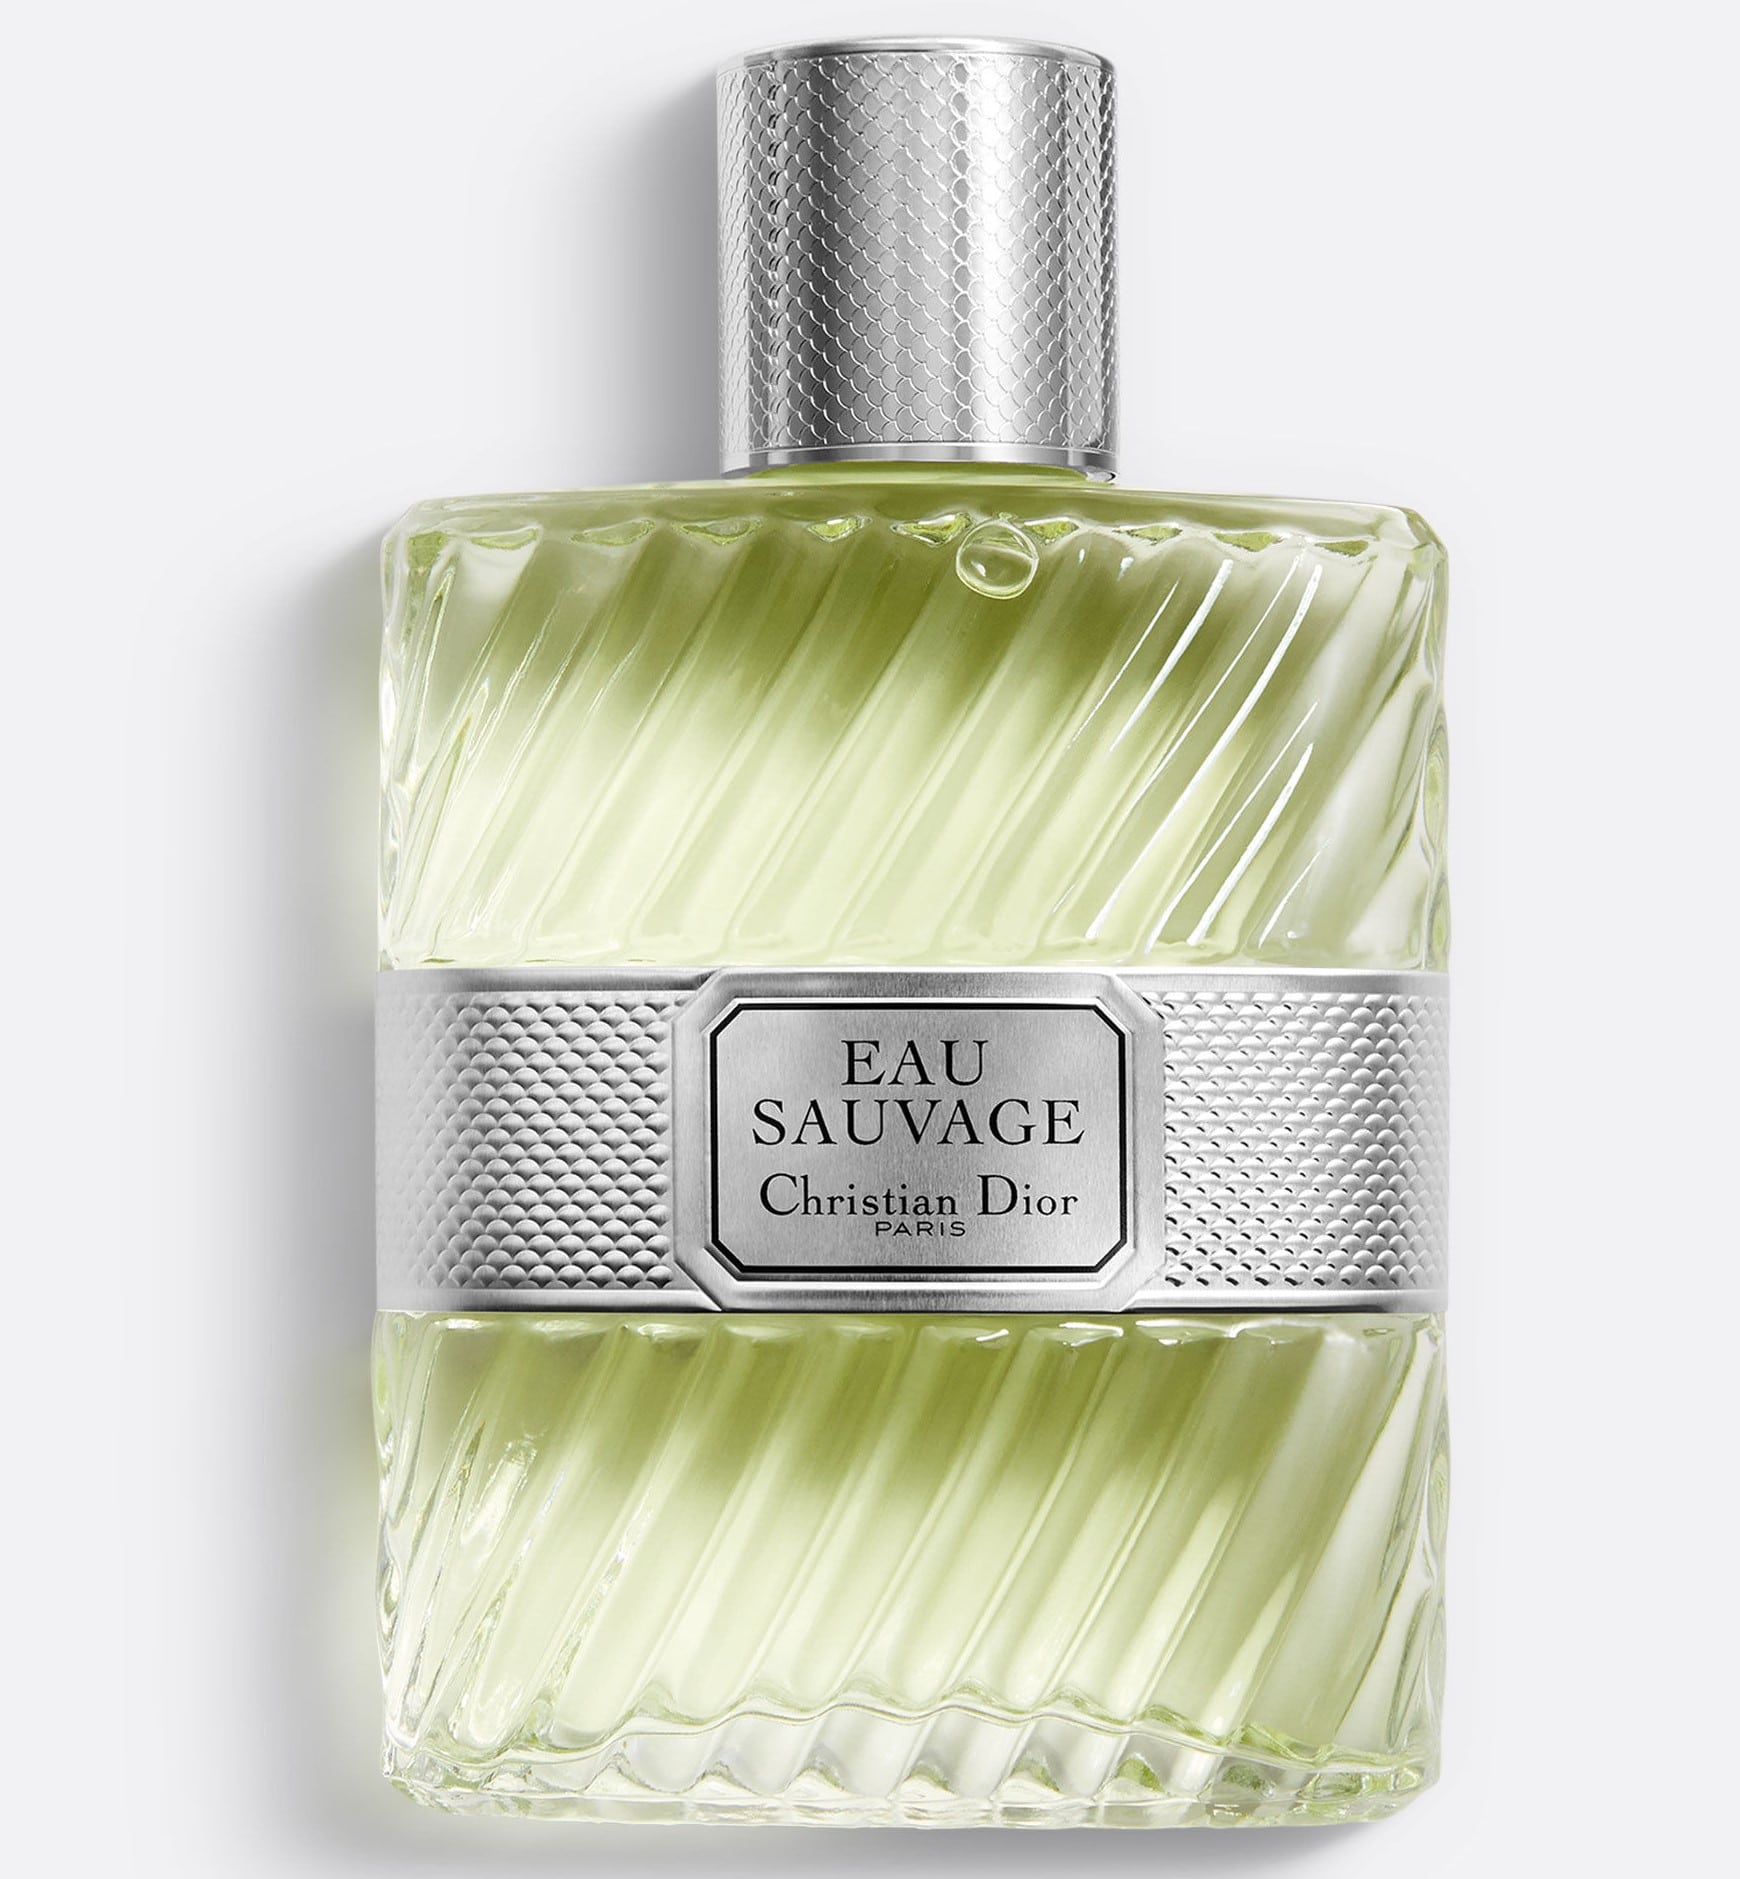 EAU SAUVAGE EDT Perfume for Men by Dior